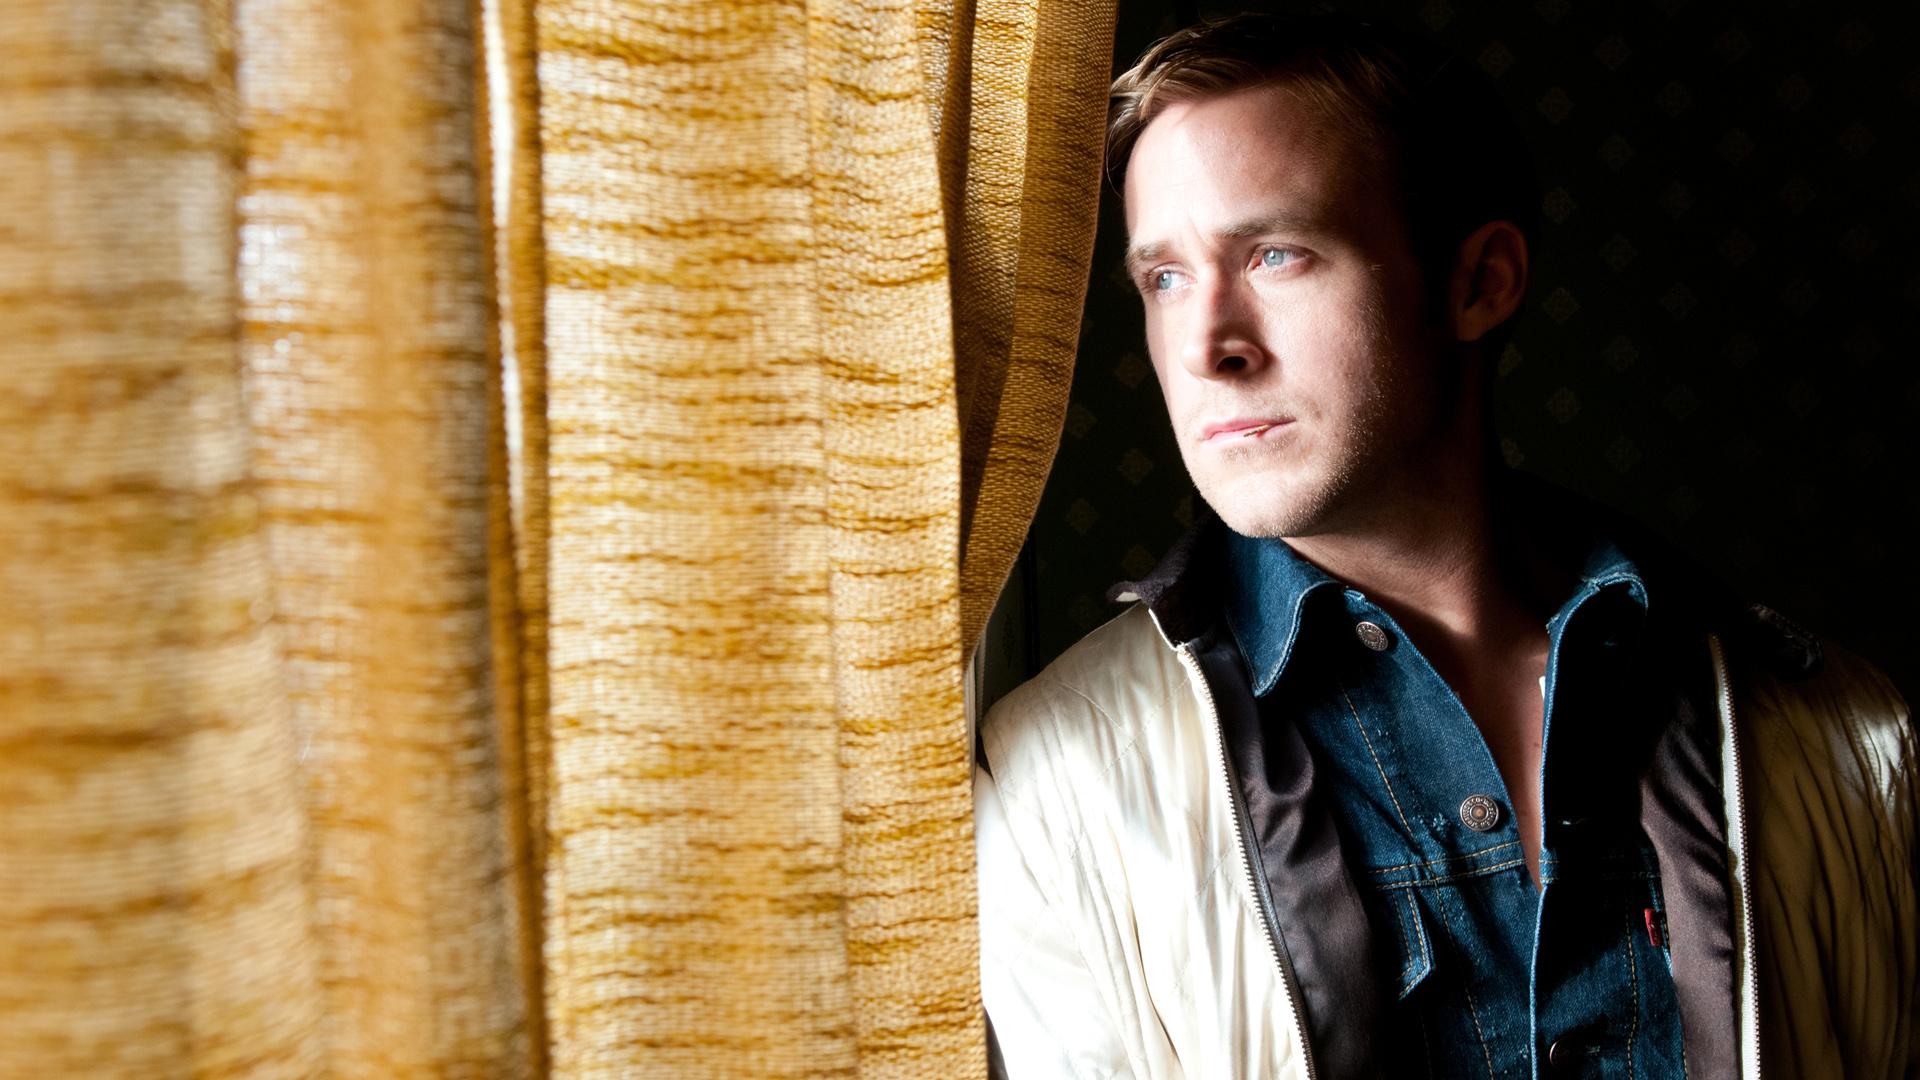 Ryan Gosling: Made a solo recording called "Put Me in the Car" in 2007. 1920x1080 Full HD Wallpaper.